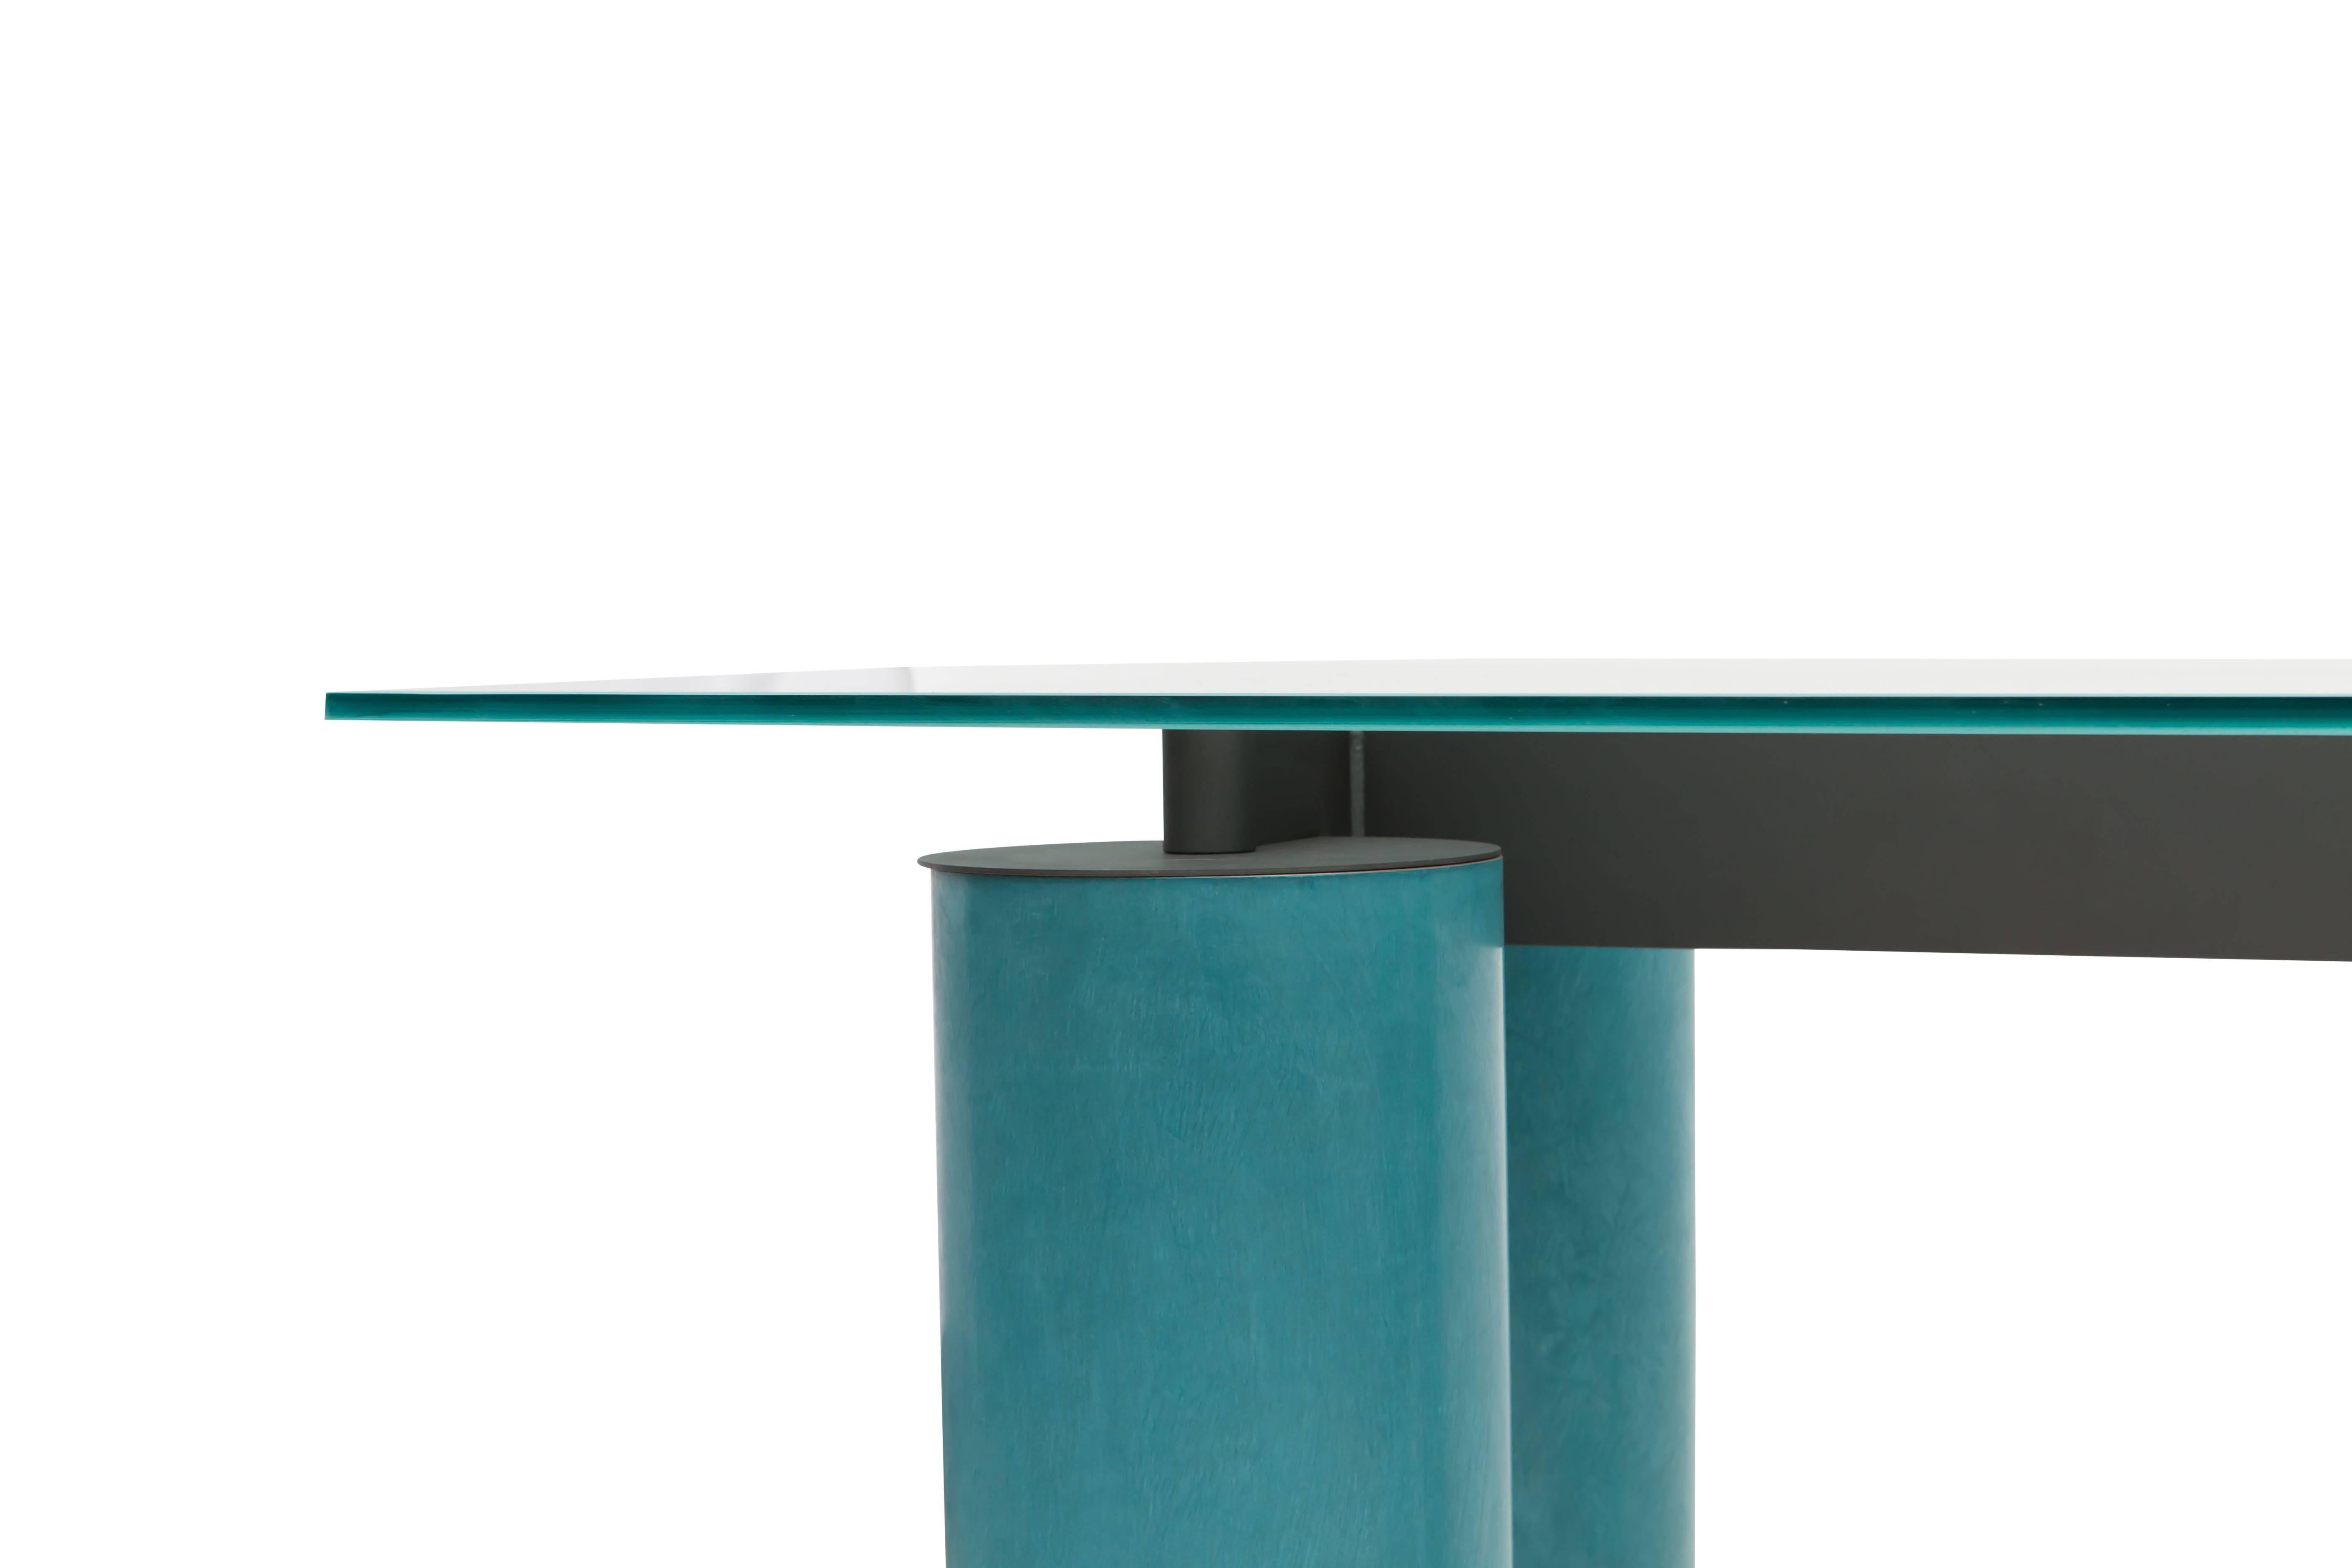 Memphis eighties style desk or table manufactured by Acerbis and designed by David Law, Lella and Massimo Vignelli.
An opalescent crystal top on a turquoise cylindrical base.
Measures: H 72 cm x D 100 cm x W 200 cm.